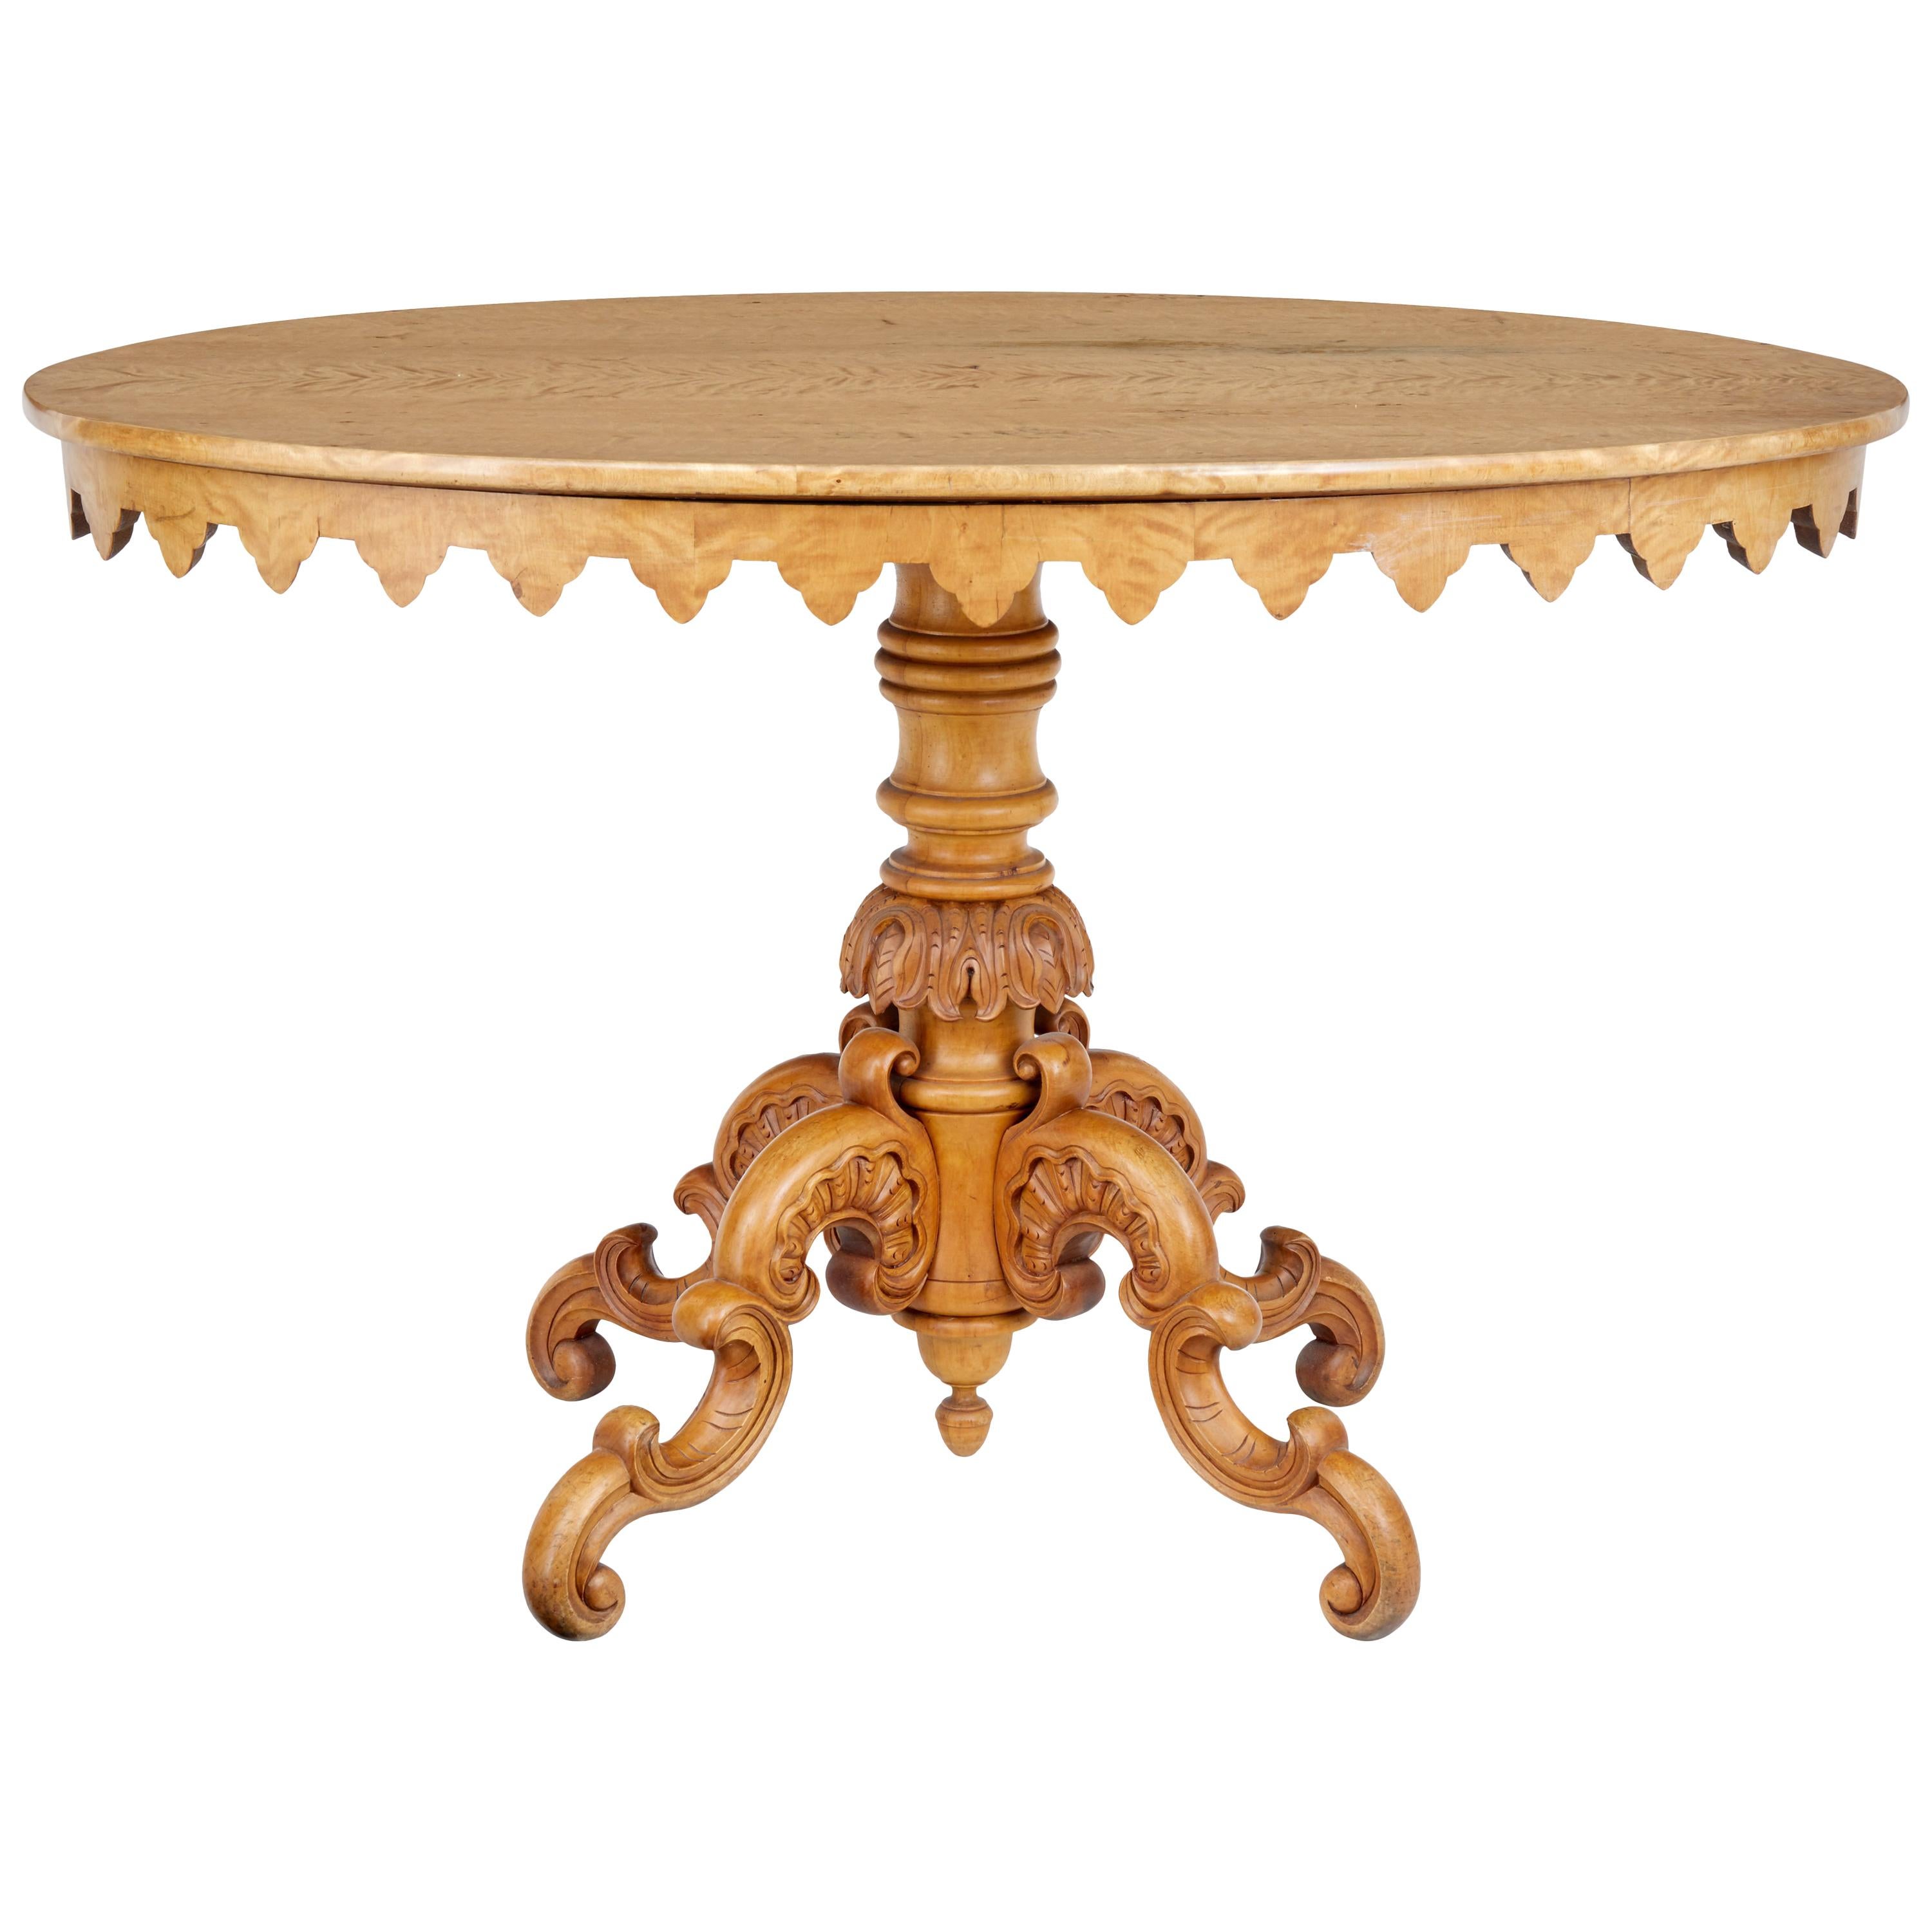 19th Century Birch Oval Occasional Table